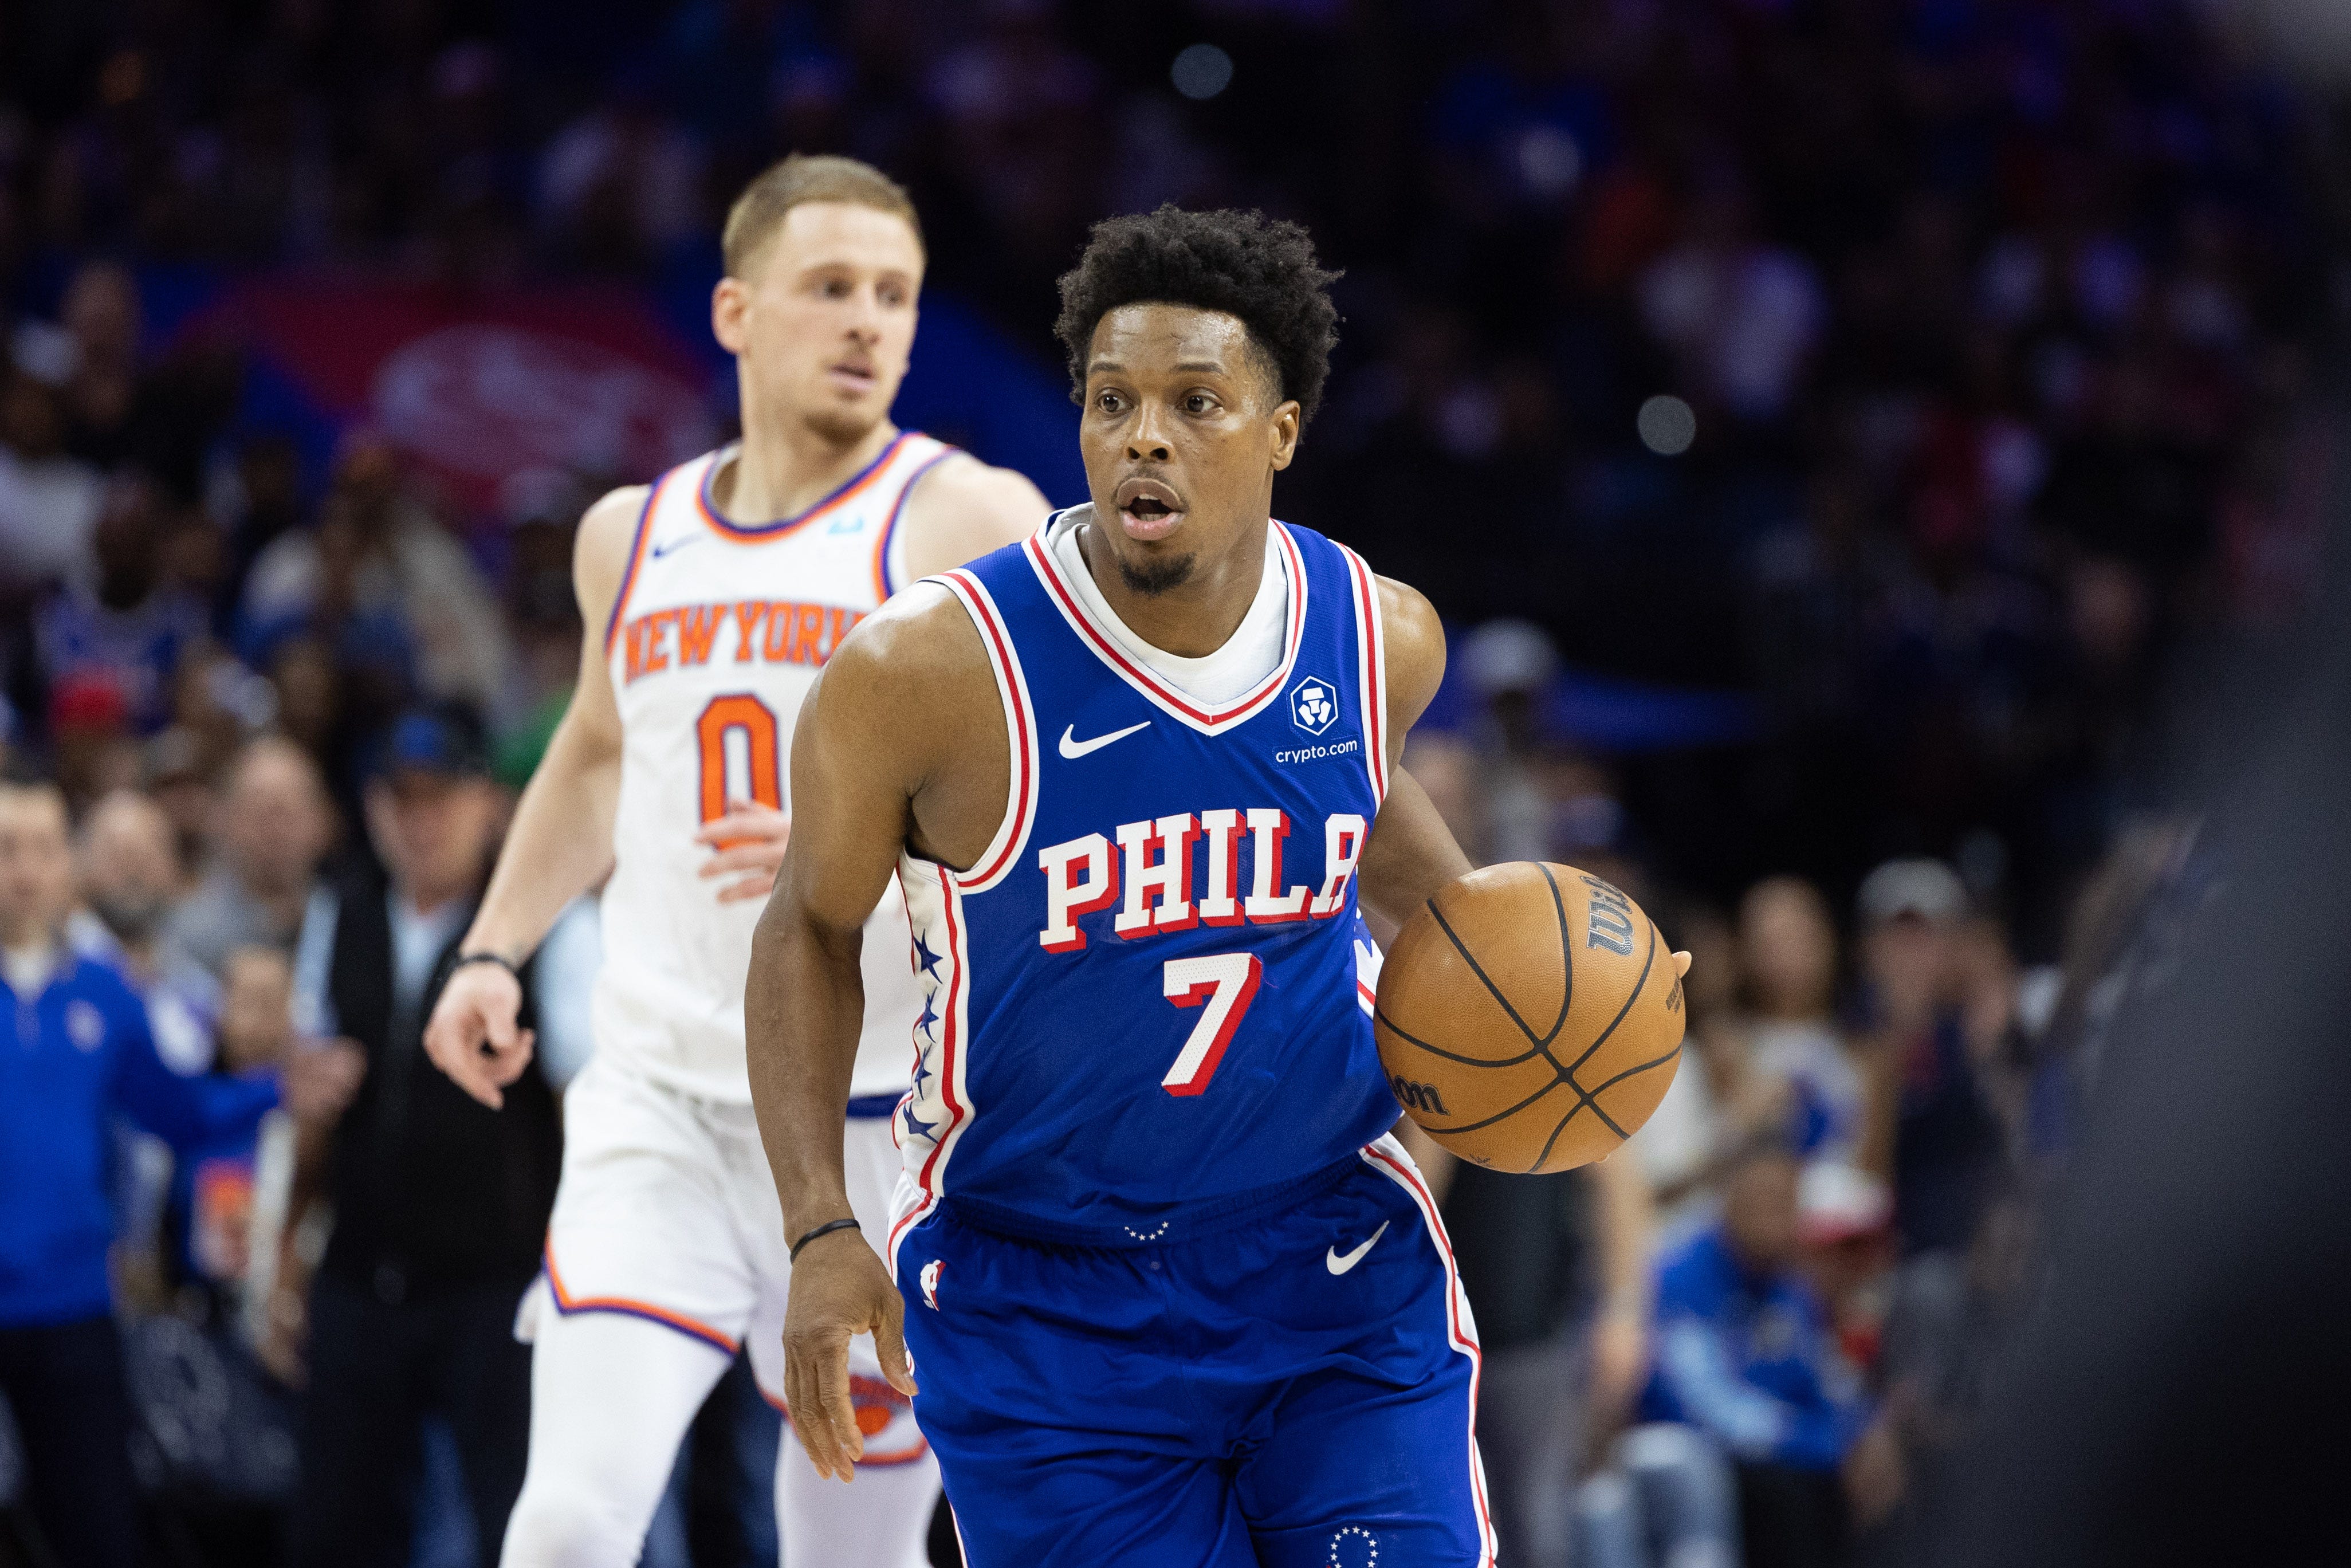 kj martin reflects on chaotic season with sixers, free agency values